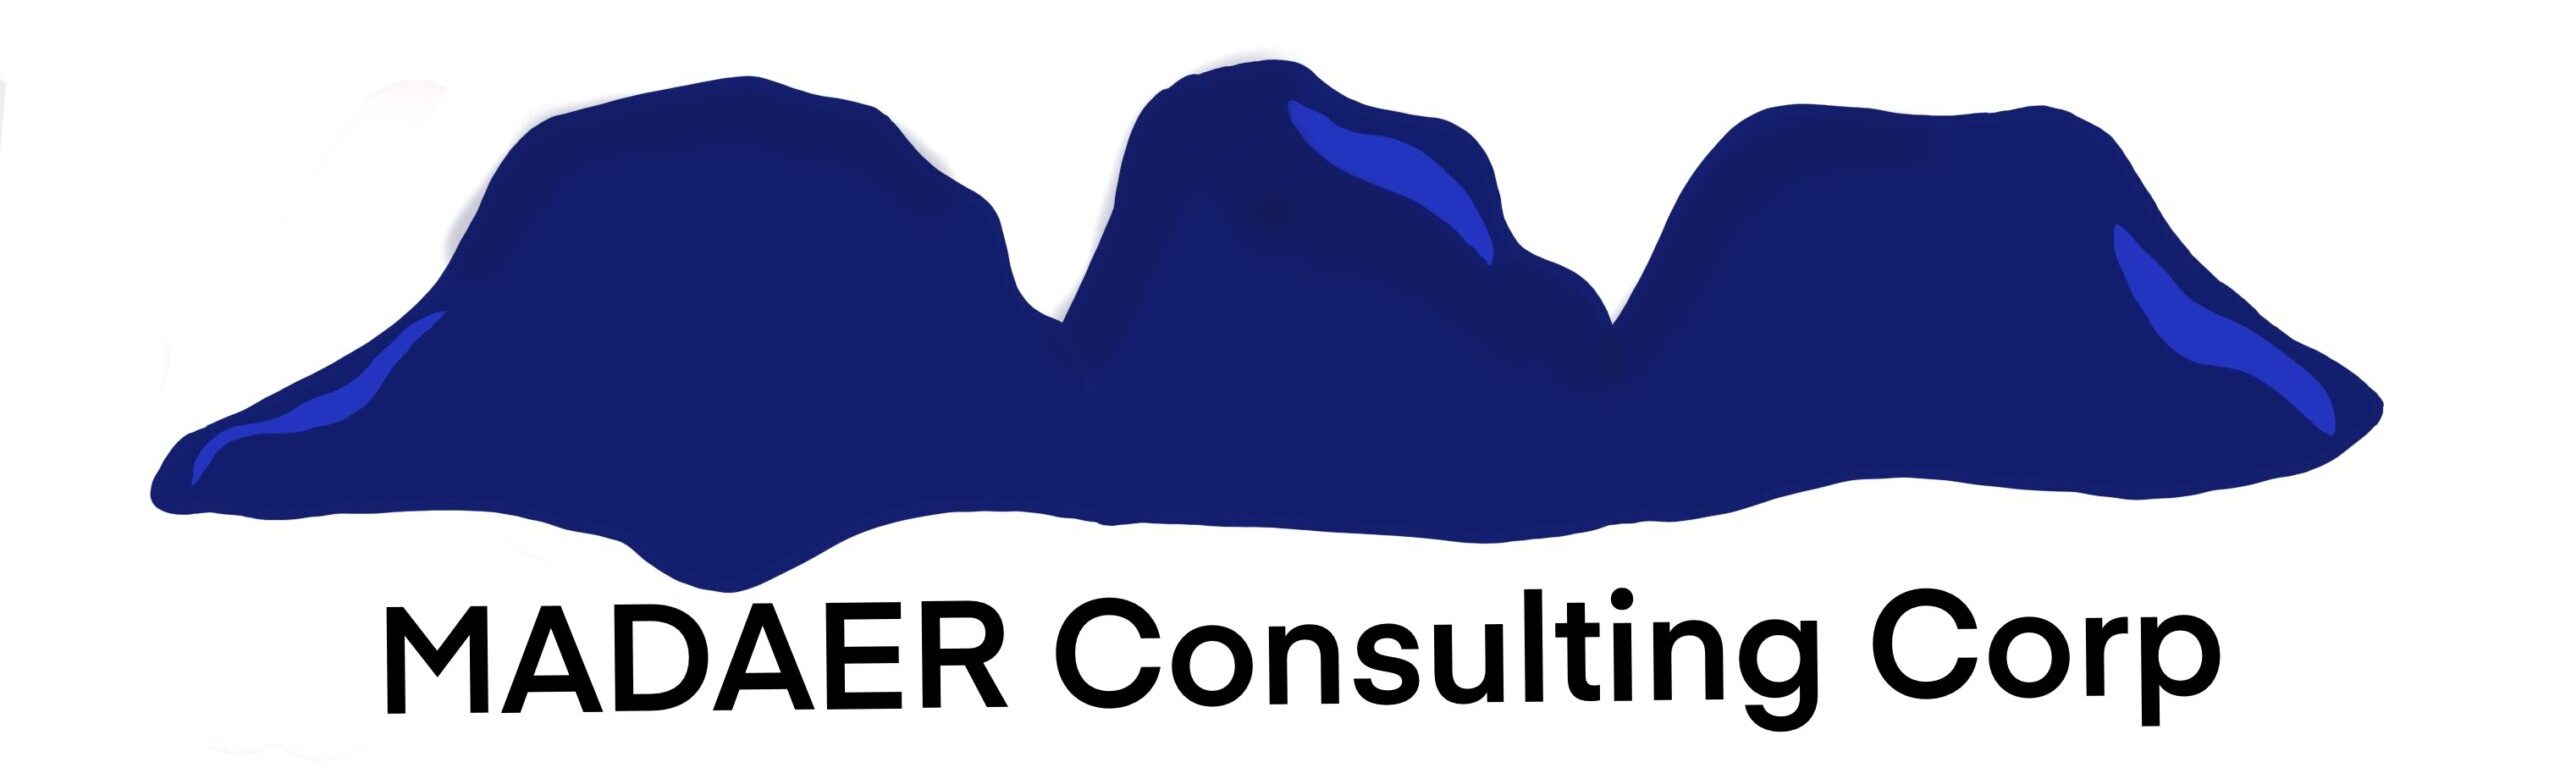 Madaer Consulting Corp.